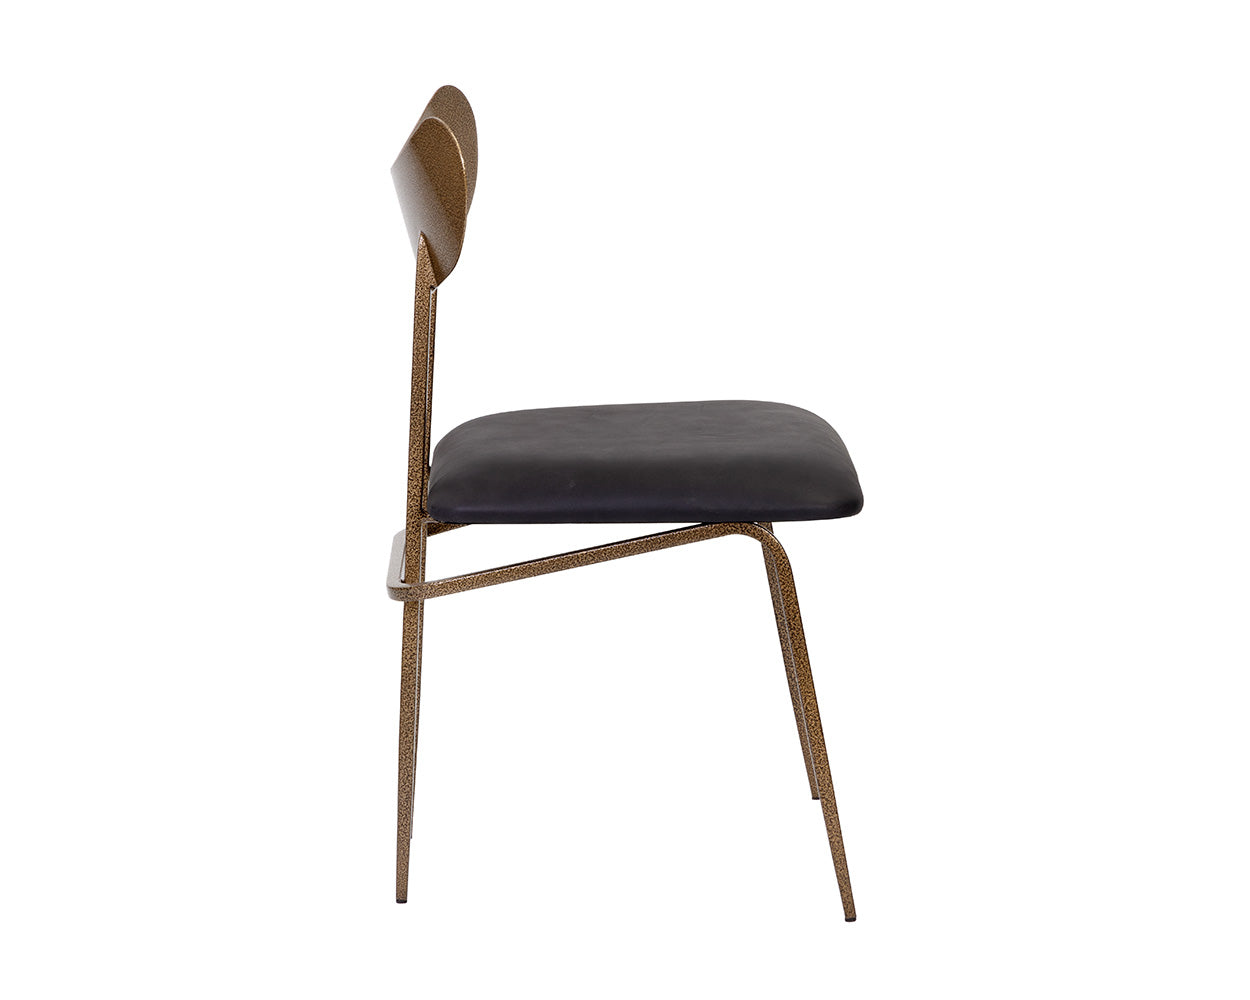 Gibbons Dining Chair - Antique Brass